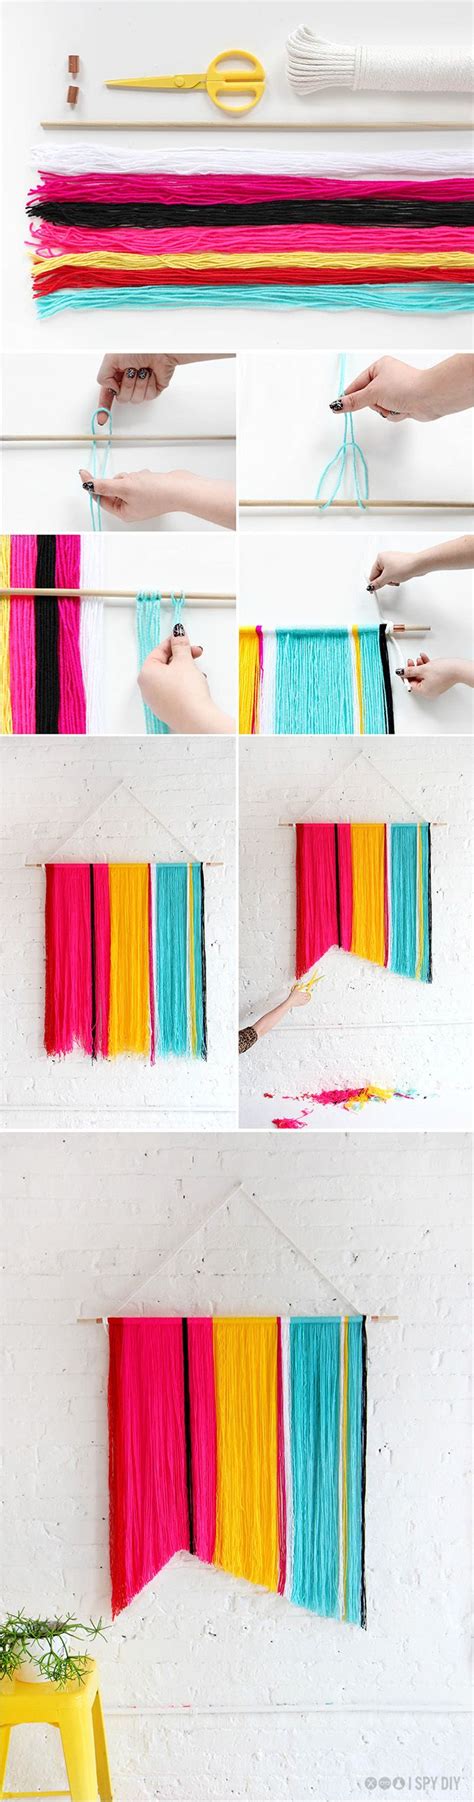 25 Diy Yarn Crafts Tutorials And Ideas For Your Home